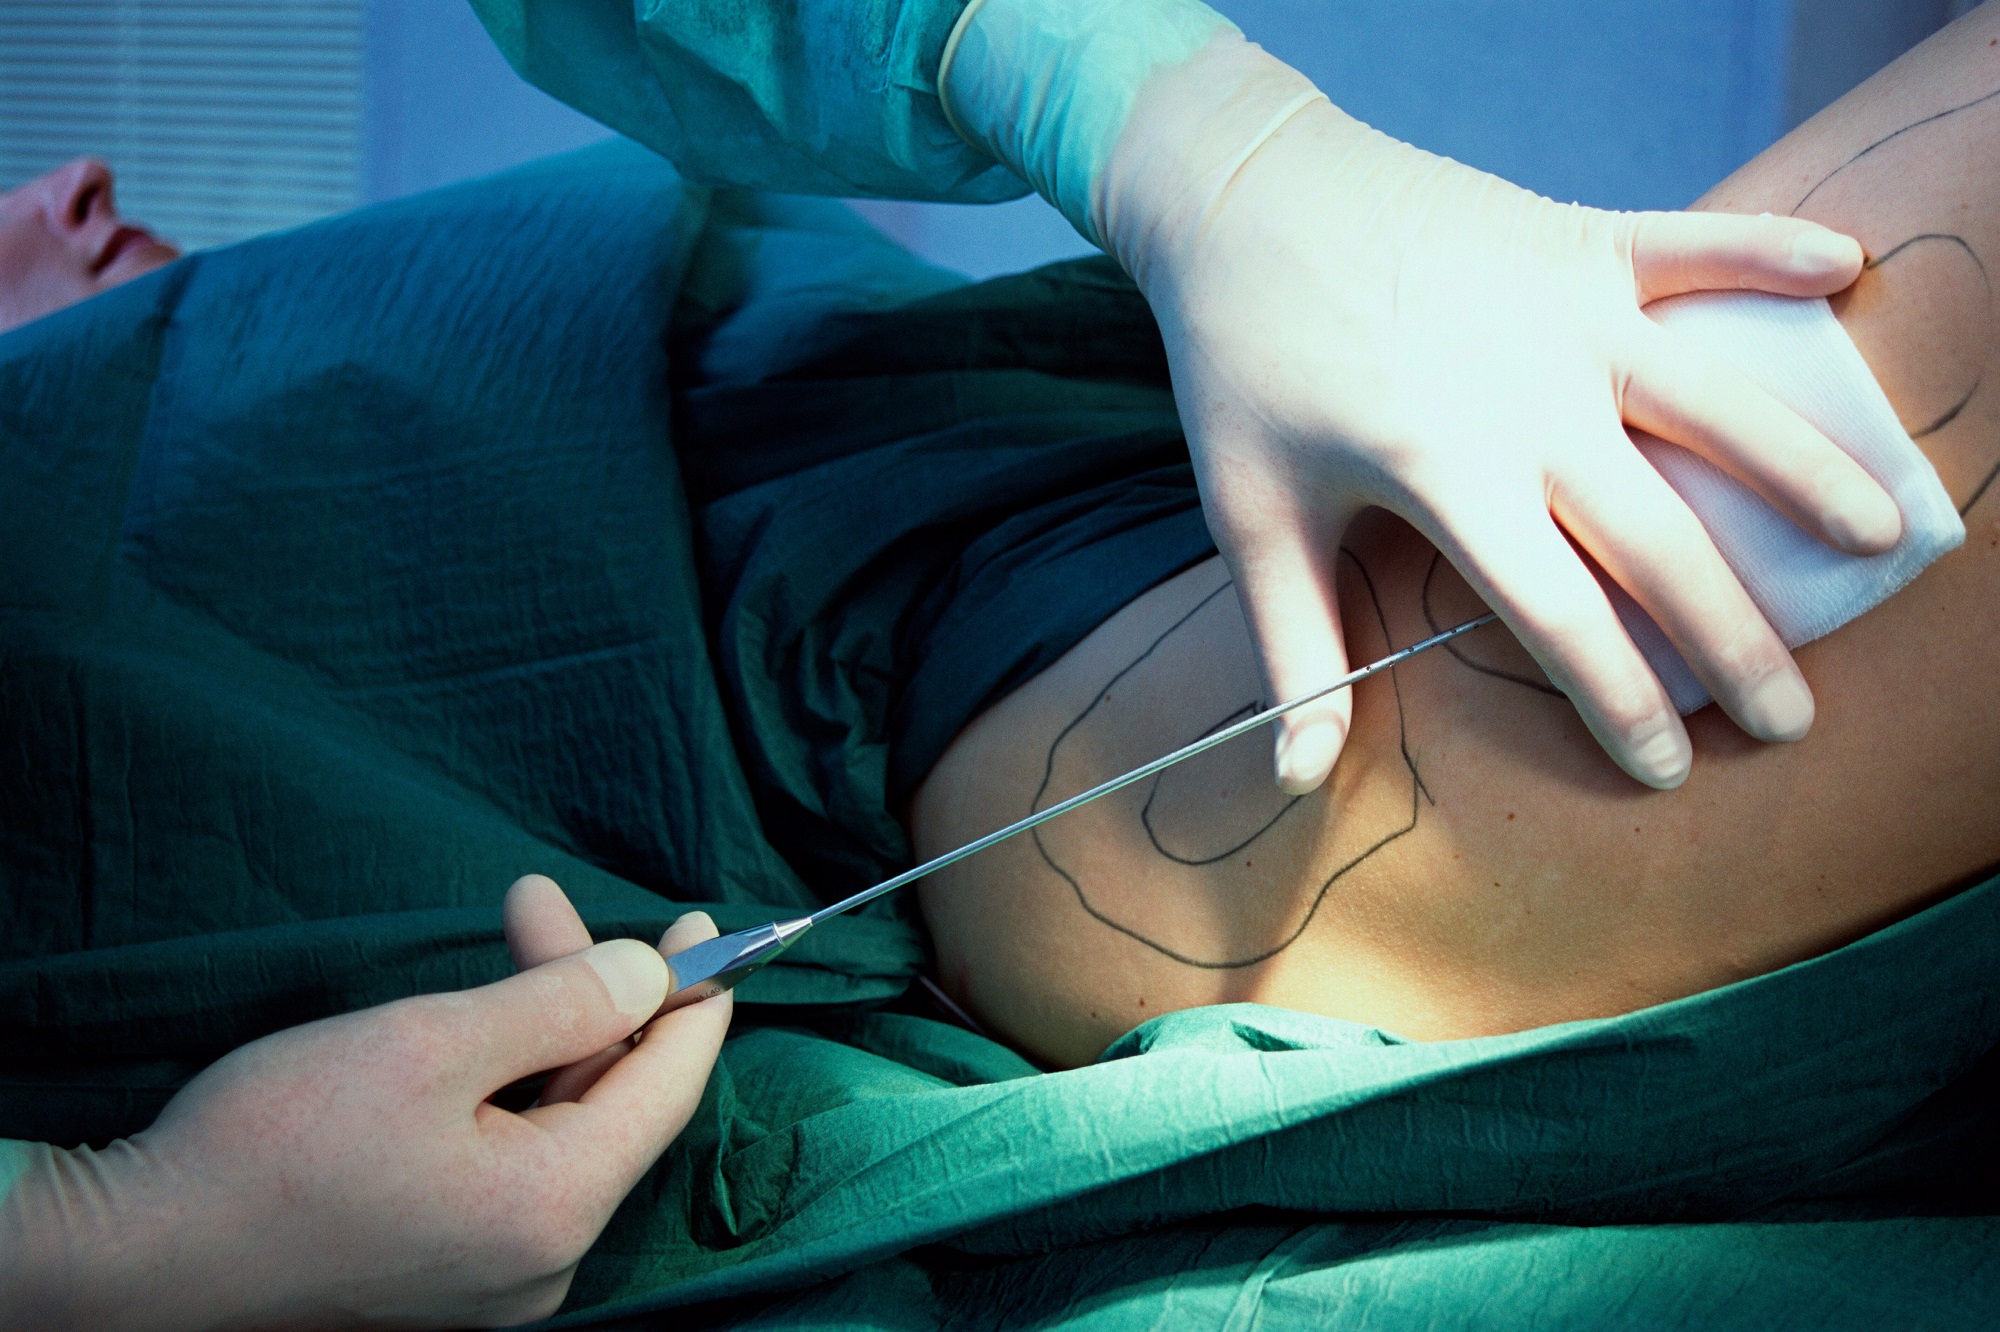 Can liposuction surgery be harmful for human body?